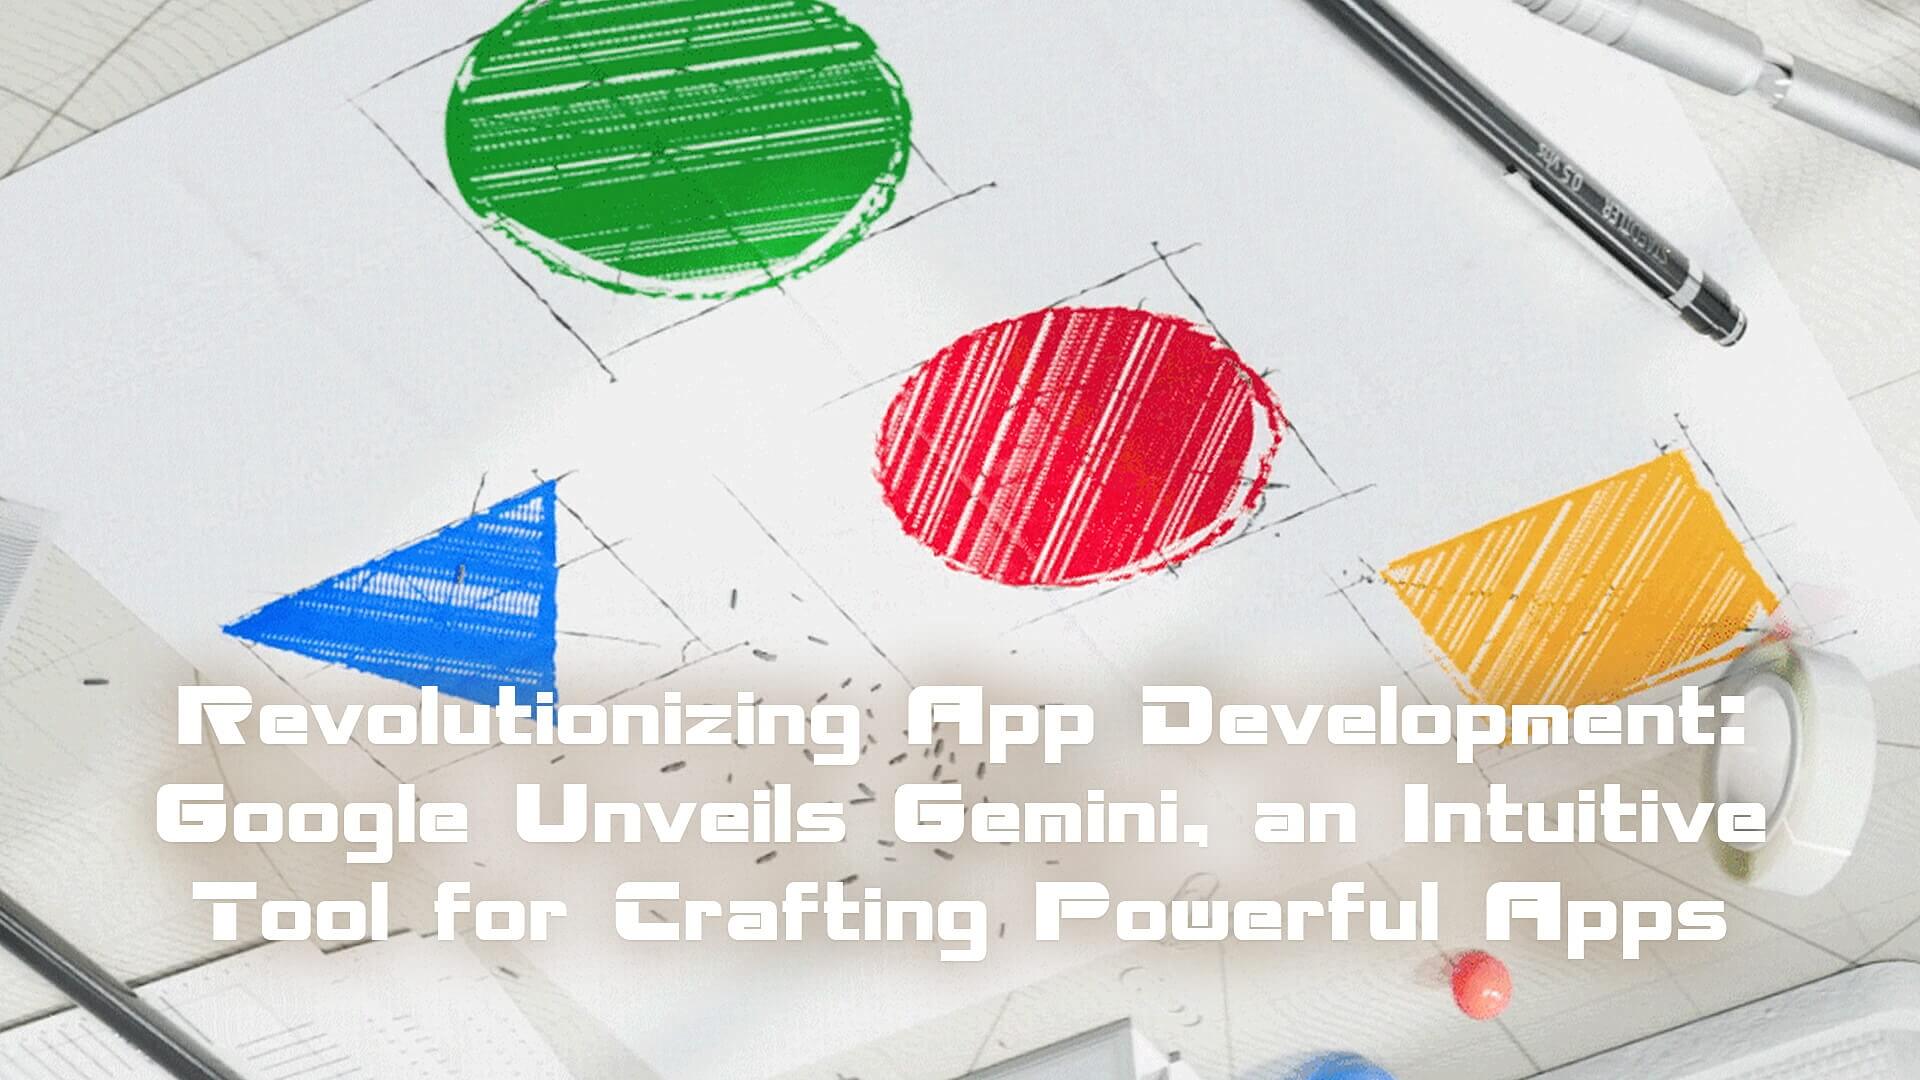 Read more about the article Revolutionizing App Development: Google Unveils Gemini, an Intuitive Tool for Crafting Powerful Apps and Chatbots